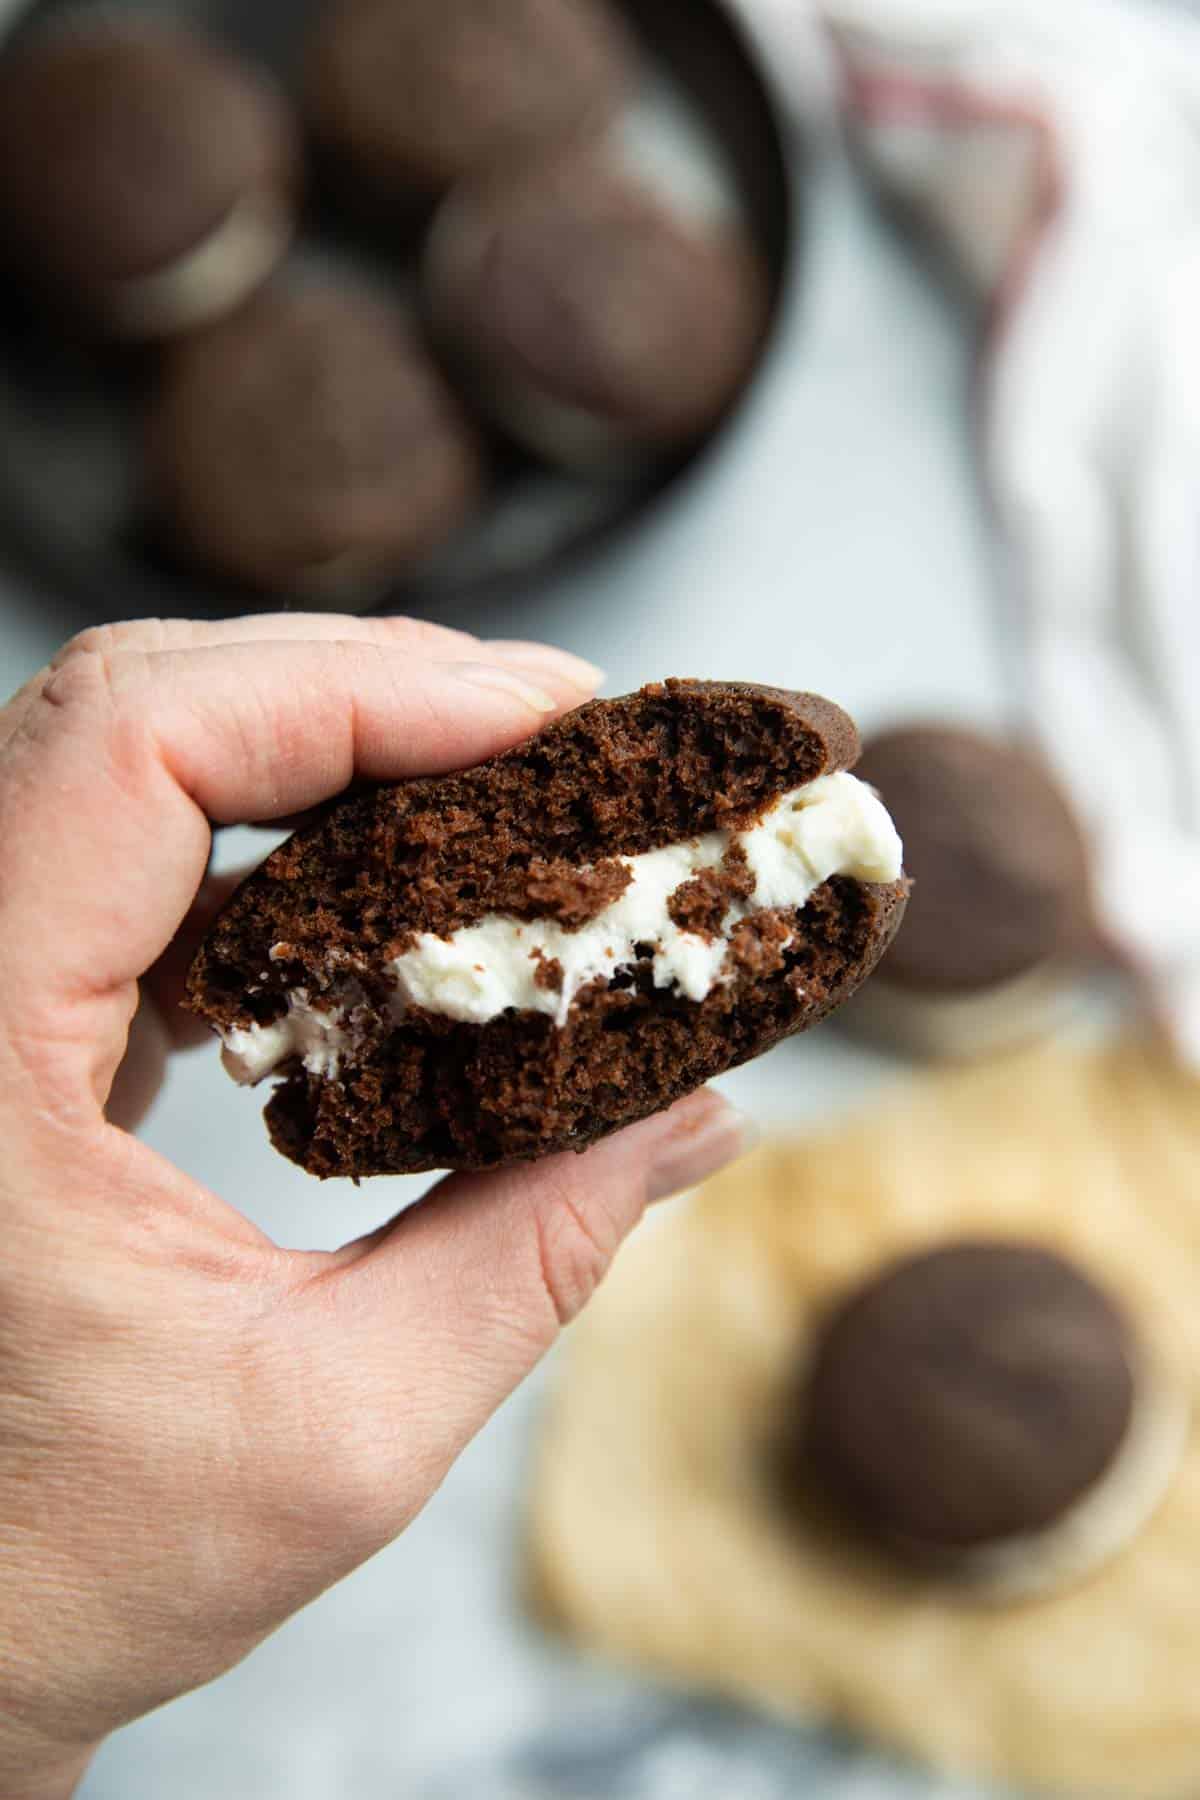 Hand holding a whoopee pie with a bite taken from it.